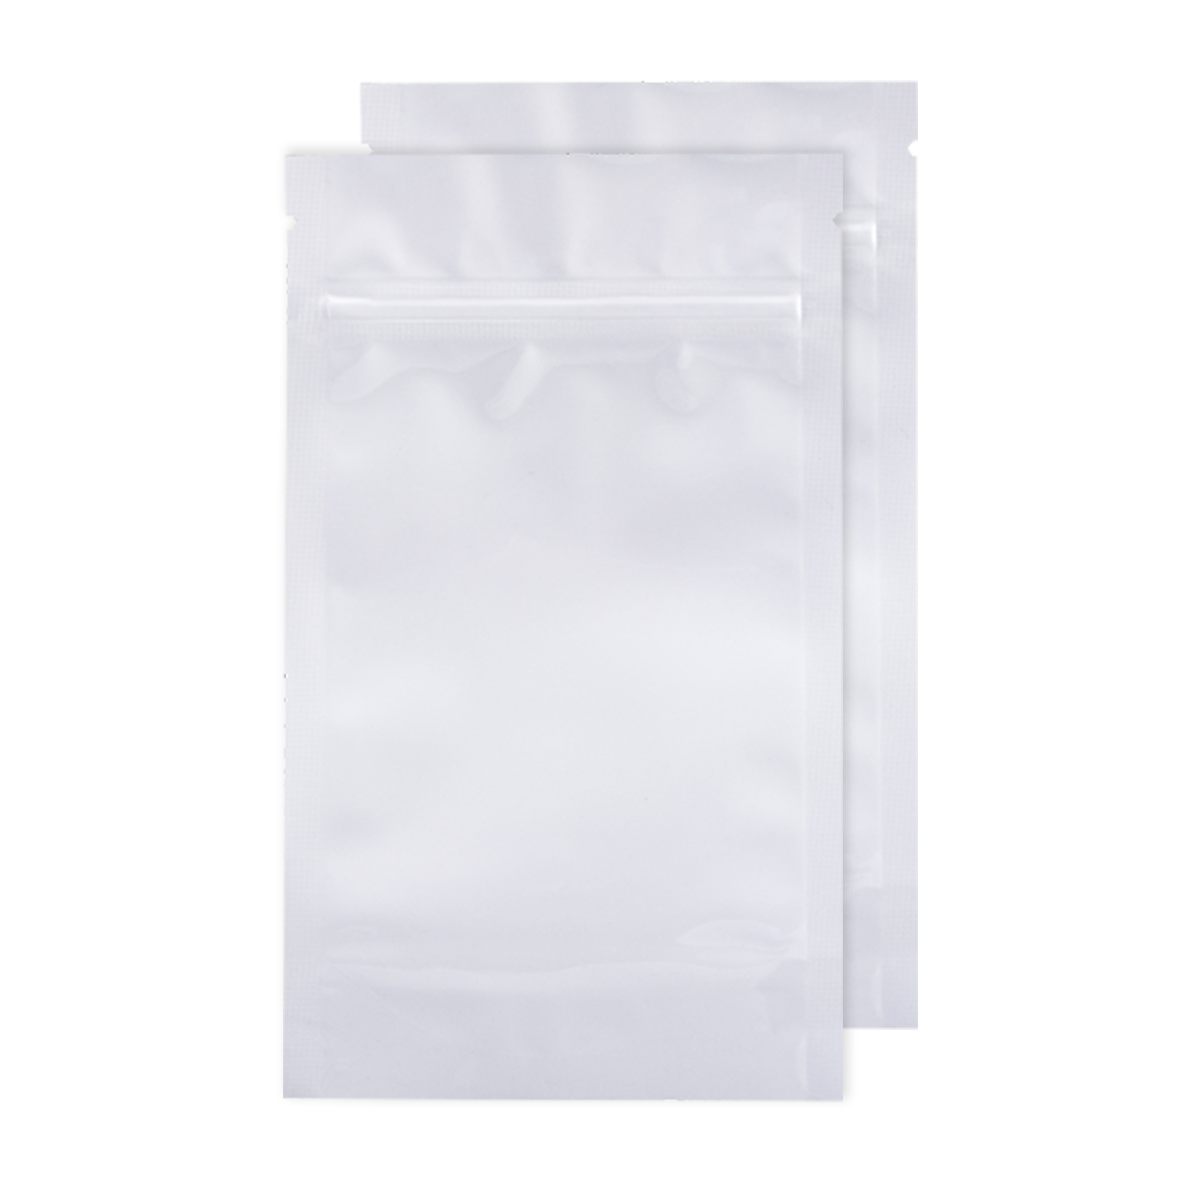 Photo of Quarter Ounce White/White Opaque Barrier Bags